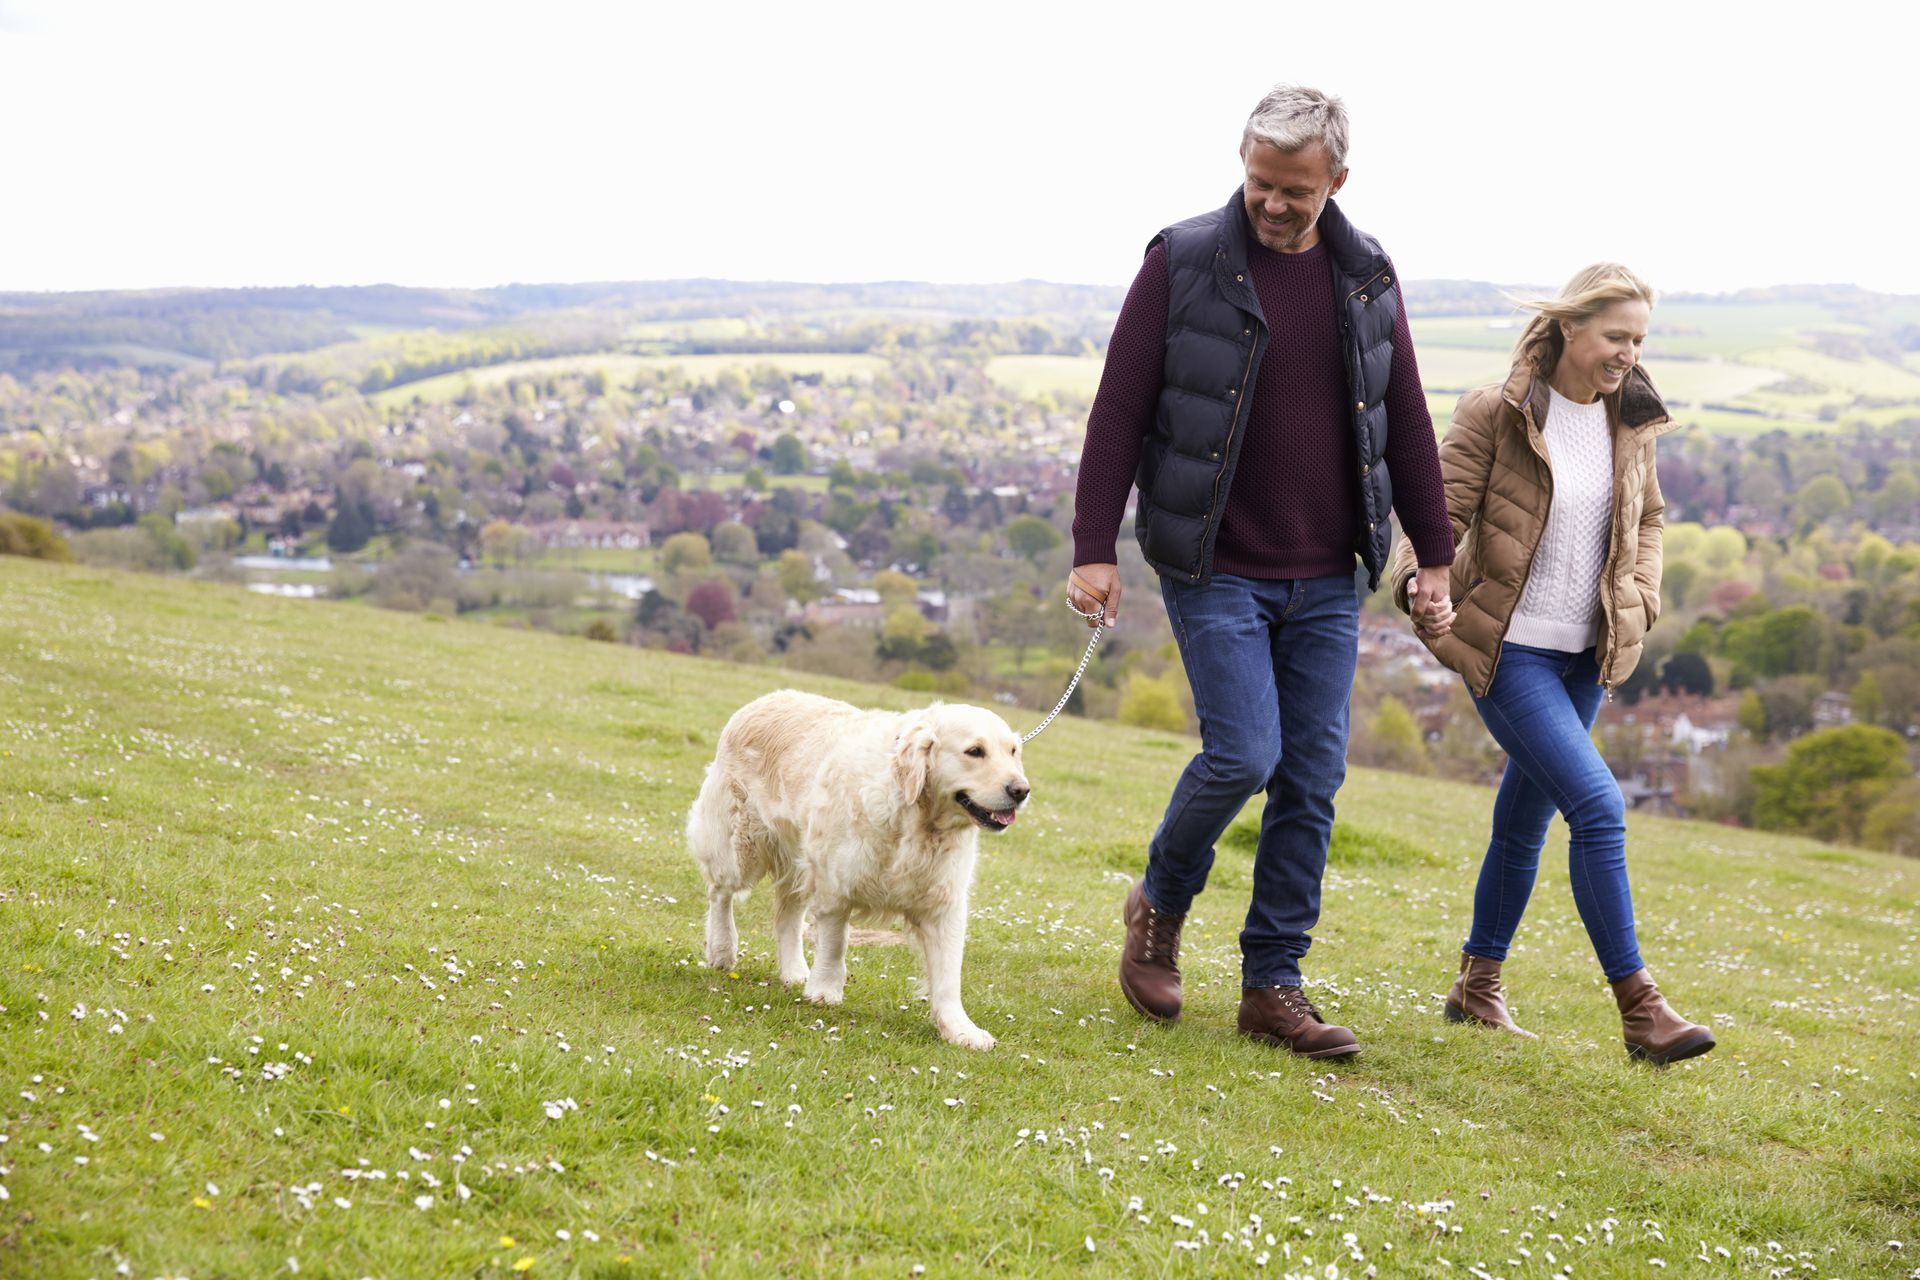 A man and woman are walking a dog on a leash in a field.